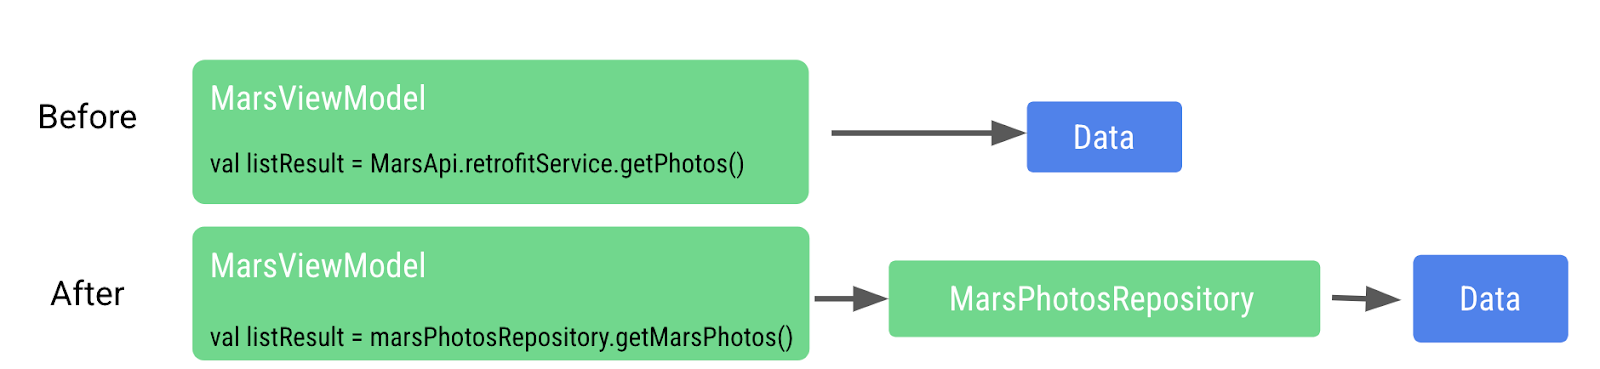 flow diagram to show how the data layer is accessed directly from Viewmodel before. Now we have Mars photos repository 